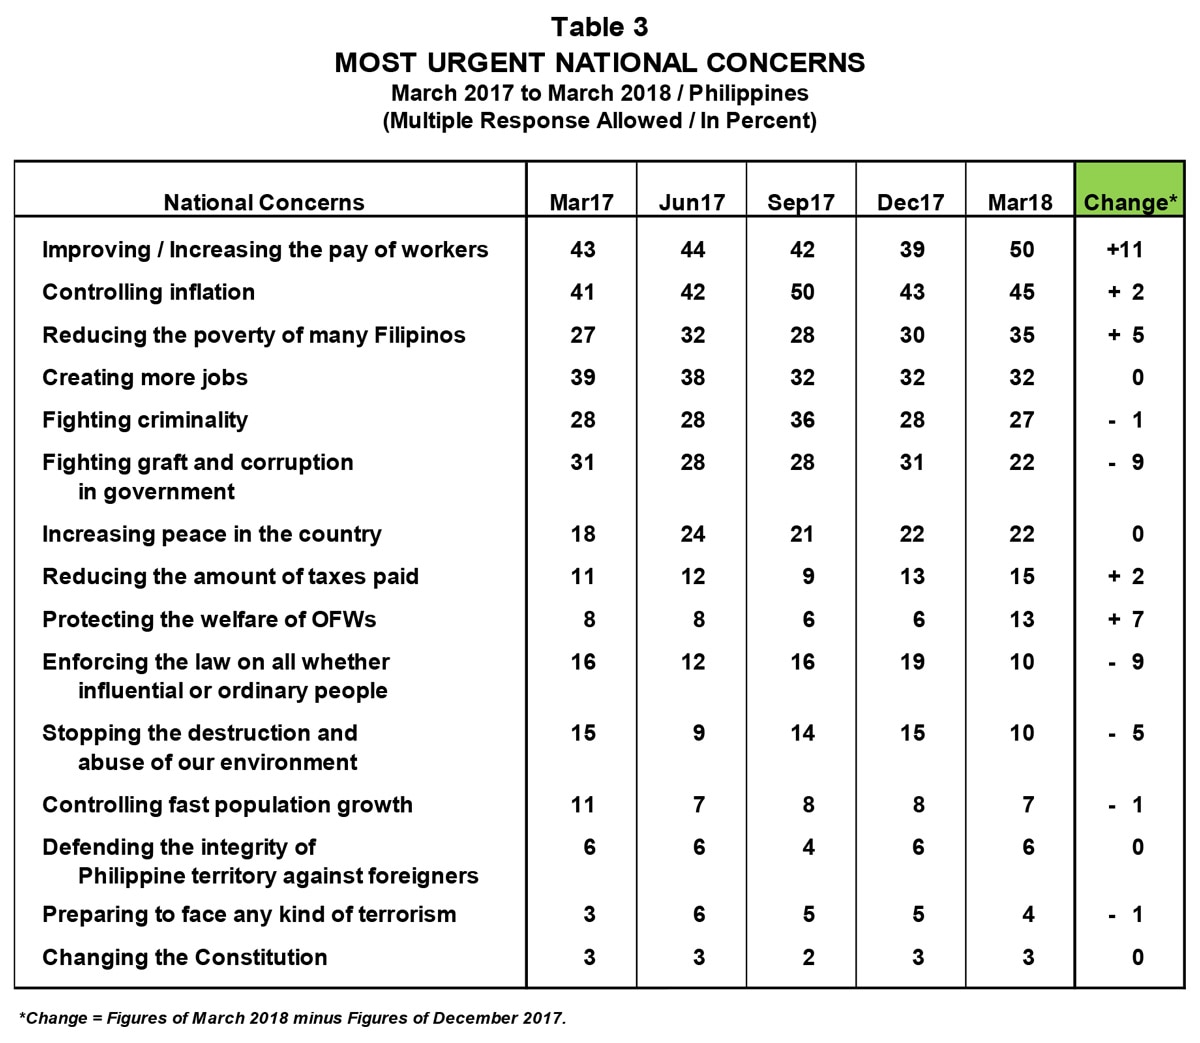 Public concern up for pay hike, OFWs: survey 3